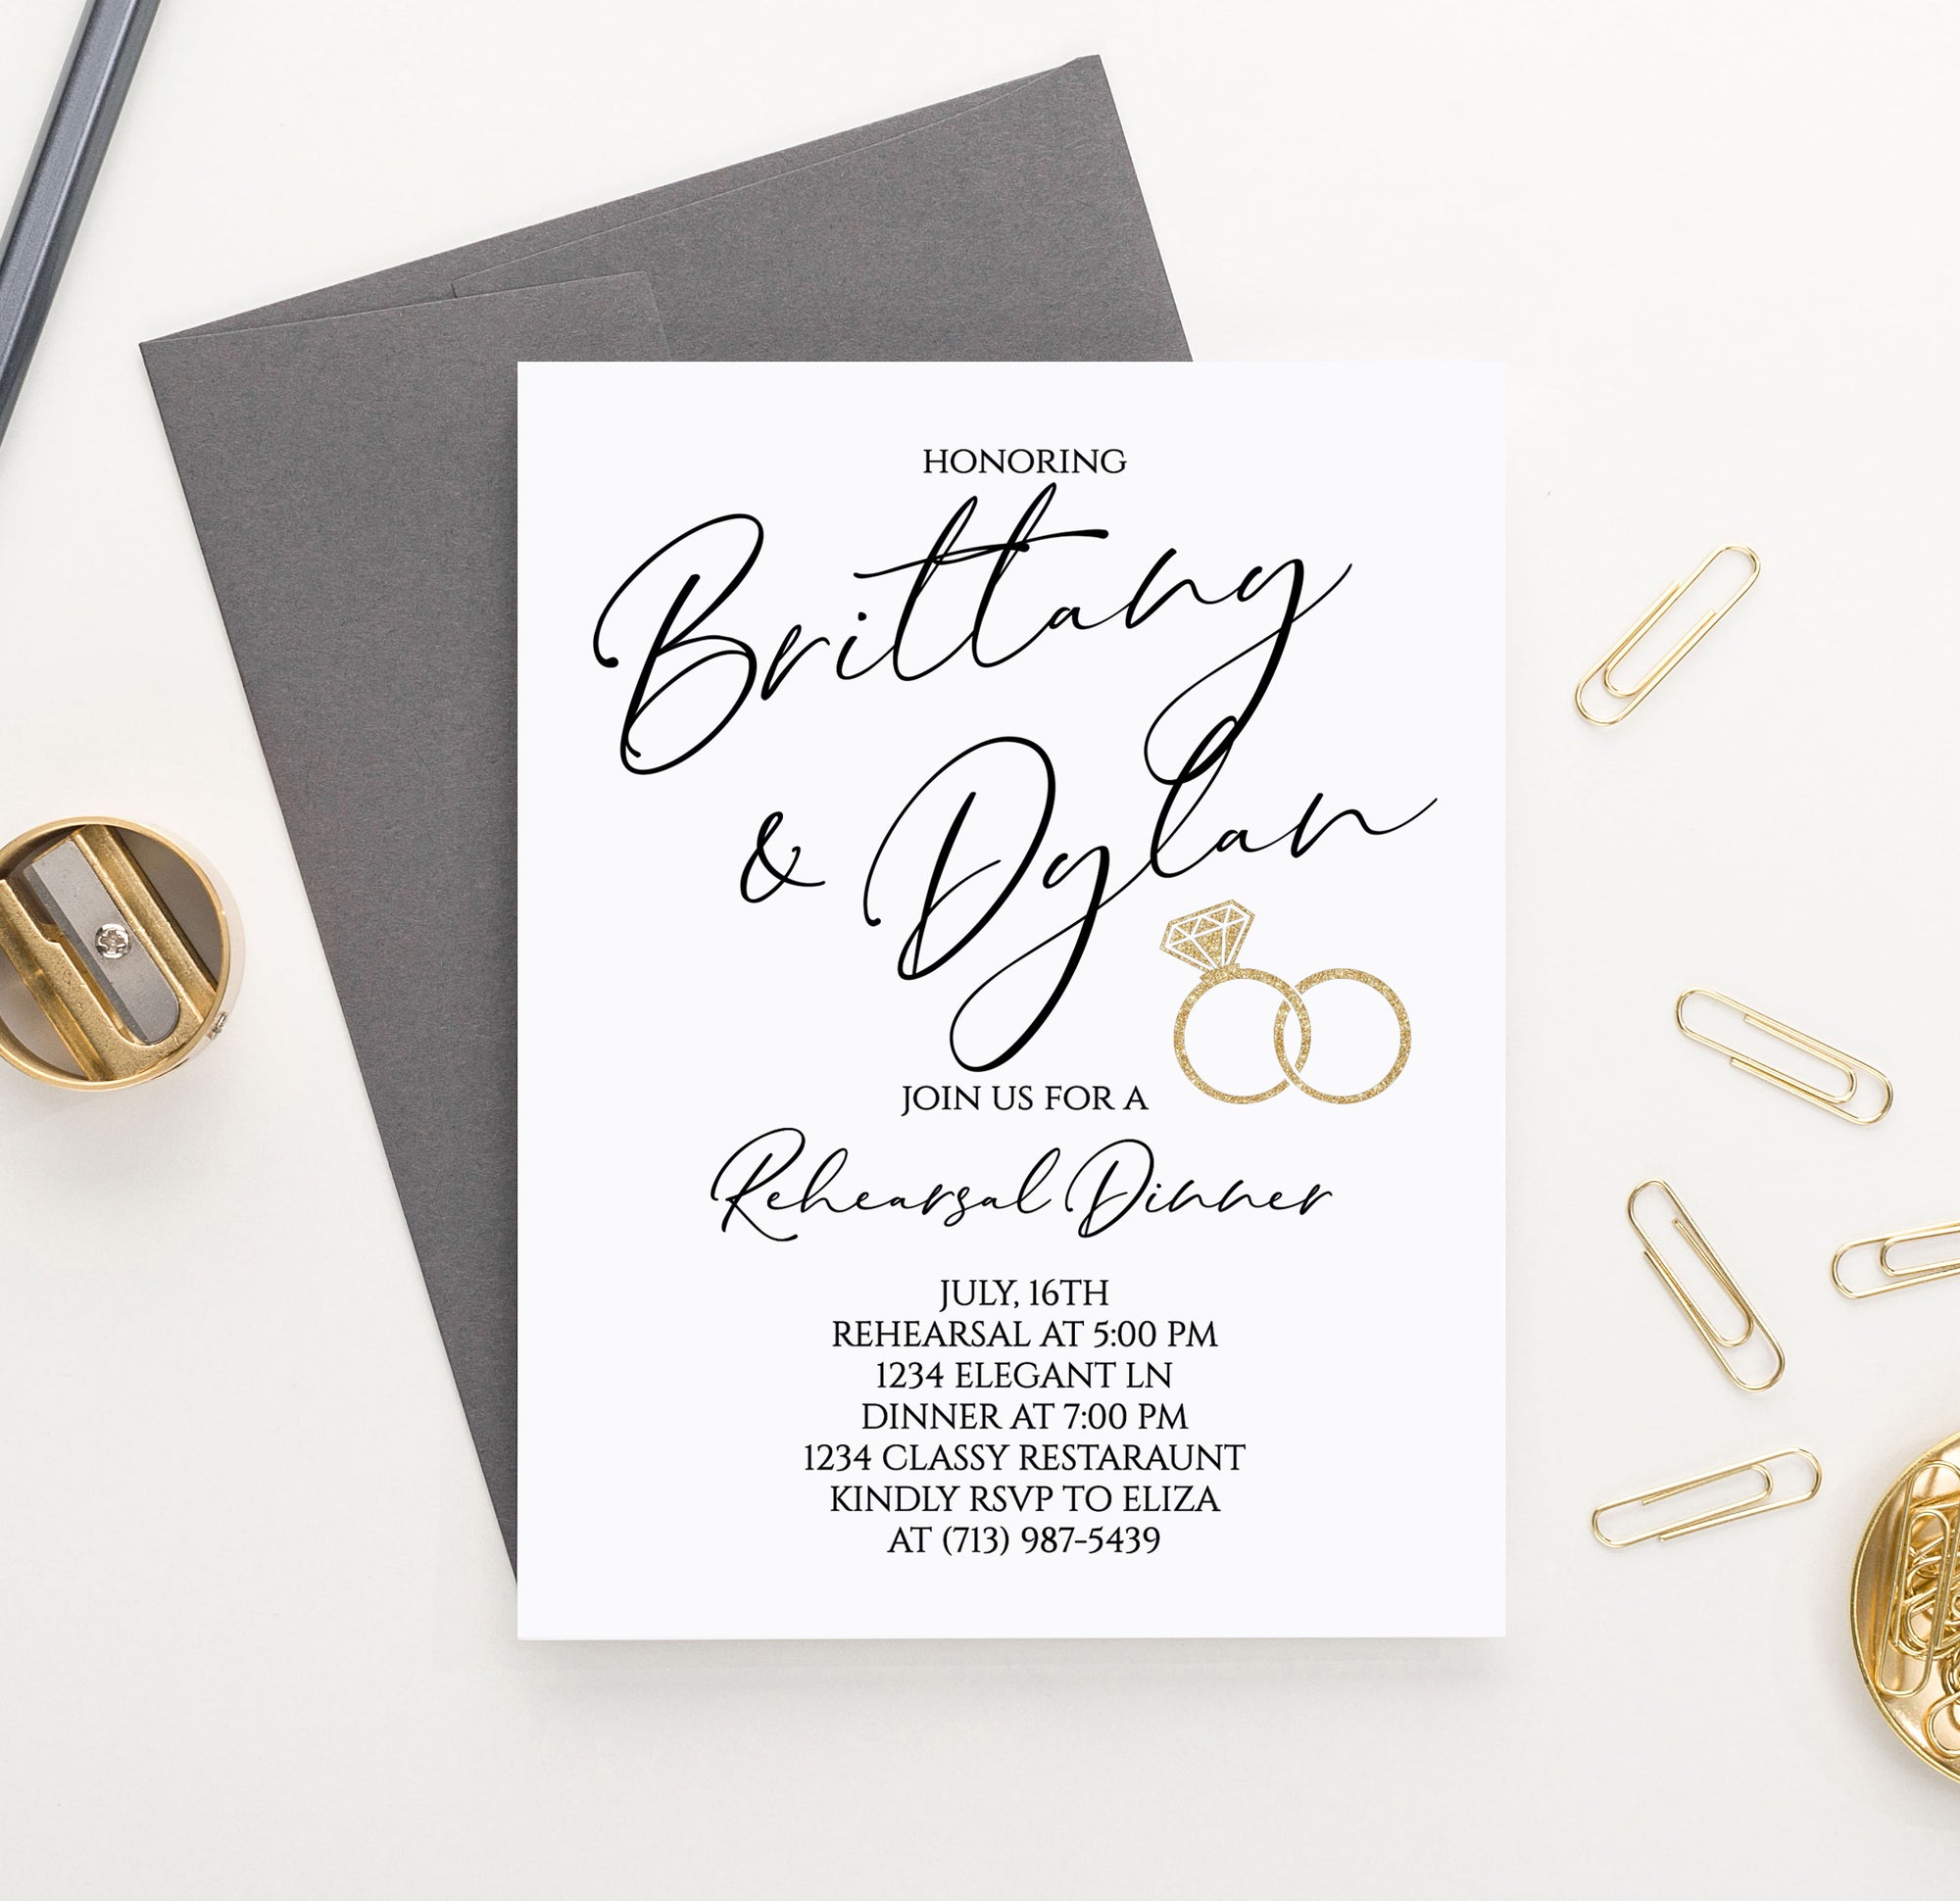 Personalized Classic Rehearsal Dinner Invitations With His And Hers Gold Rings